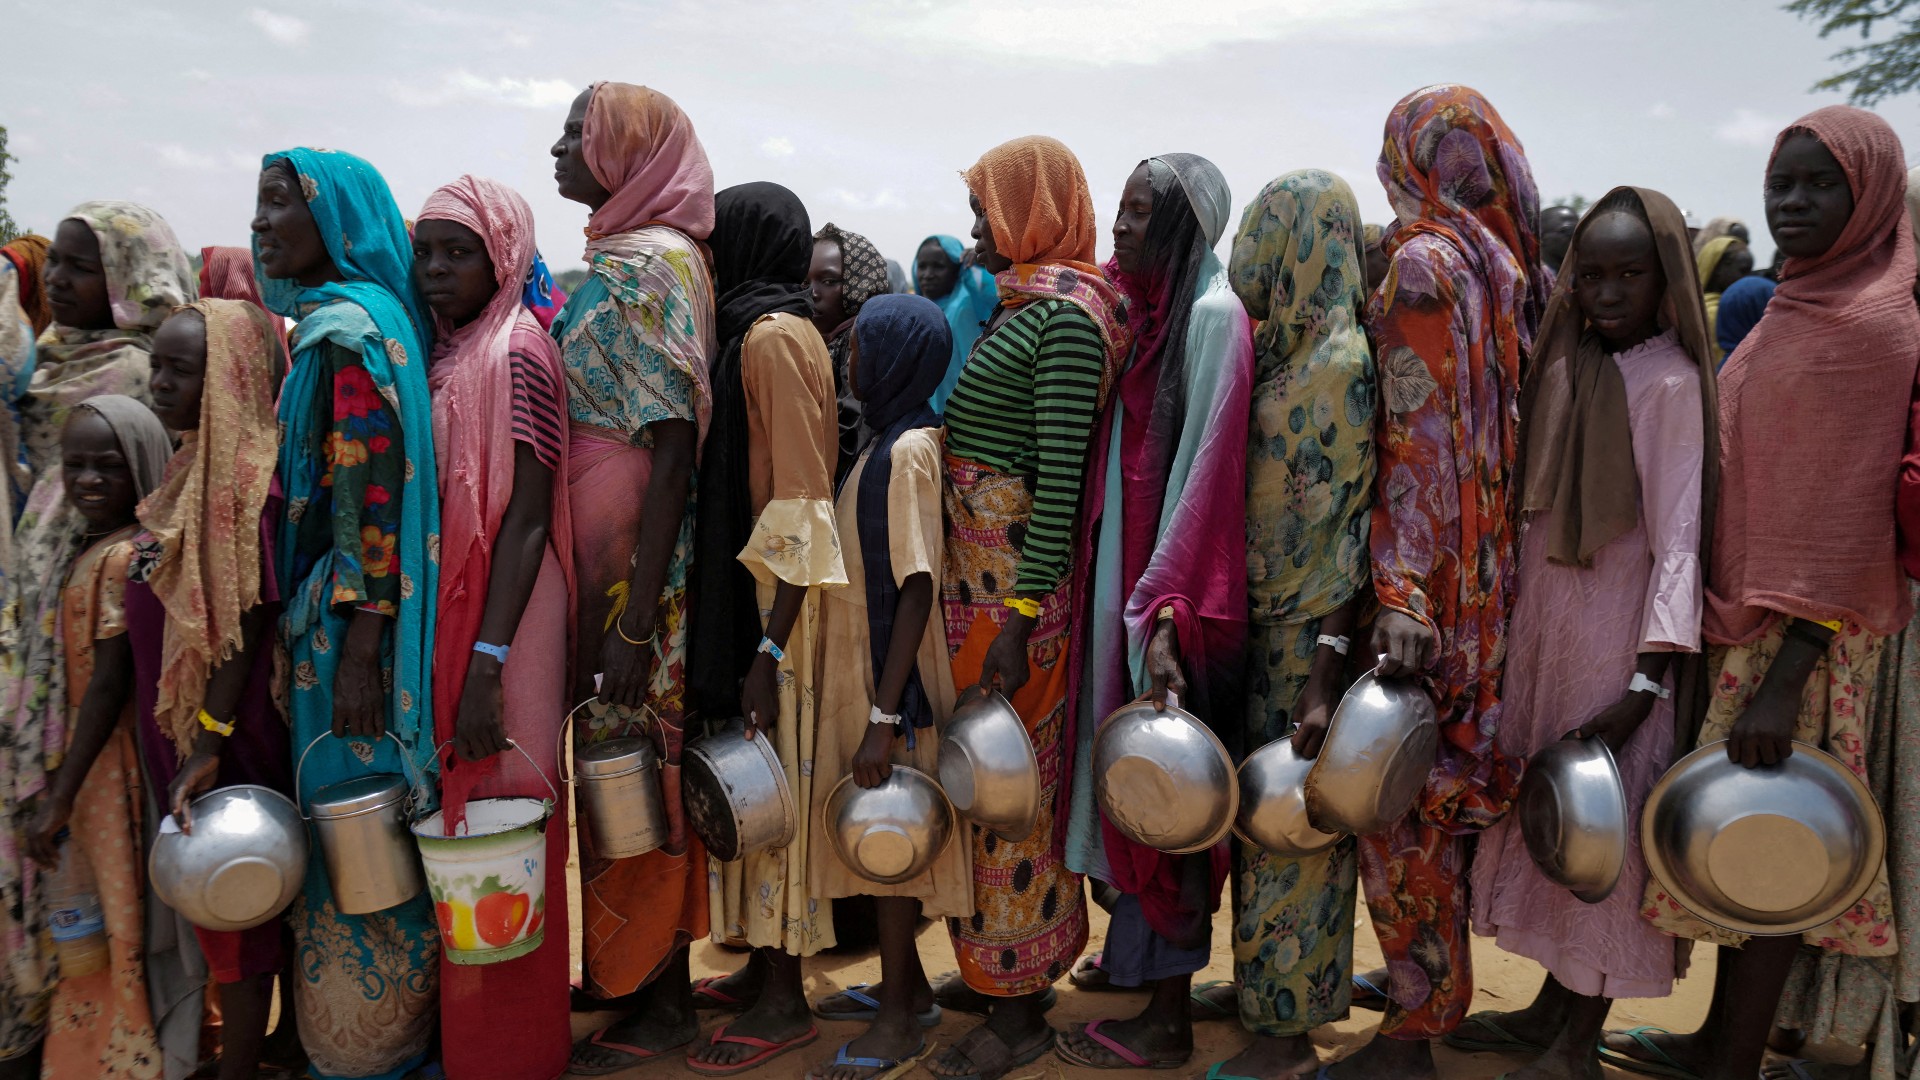 Sudanese women who fled the conflict in Sudan's Darfur region line up to receive rice portions from Red Cross volunteers in Chad (Reuters)